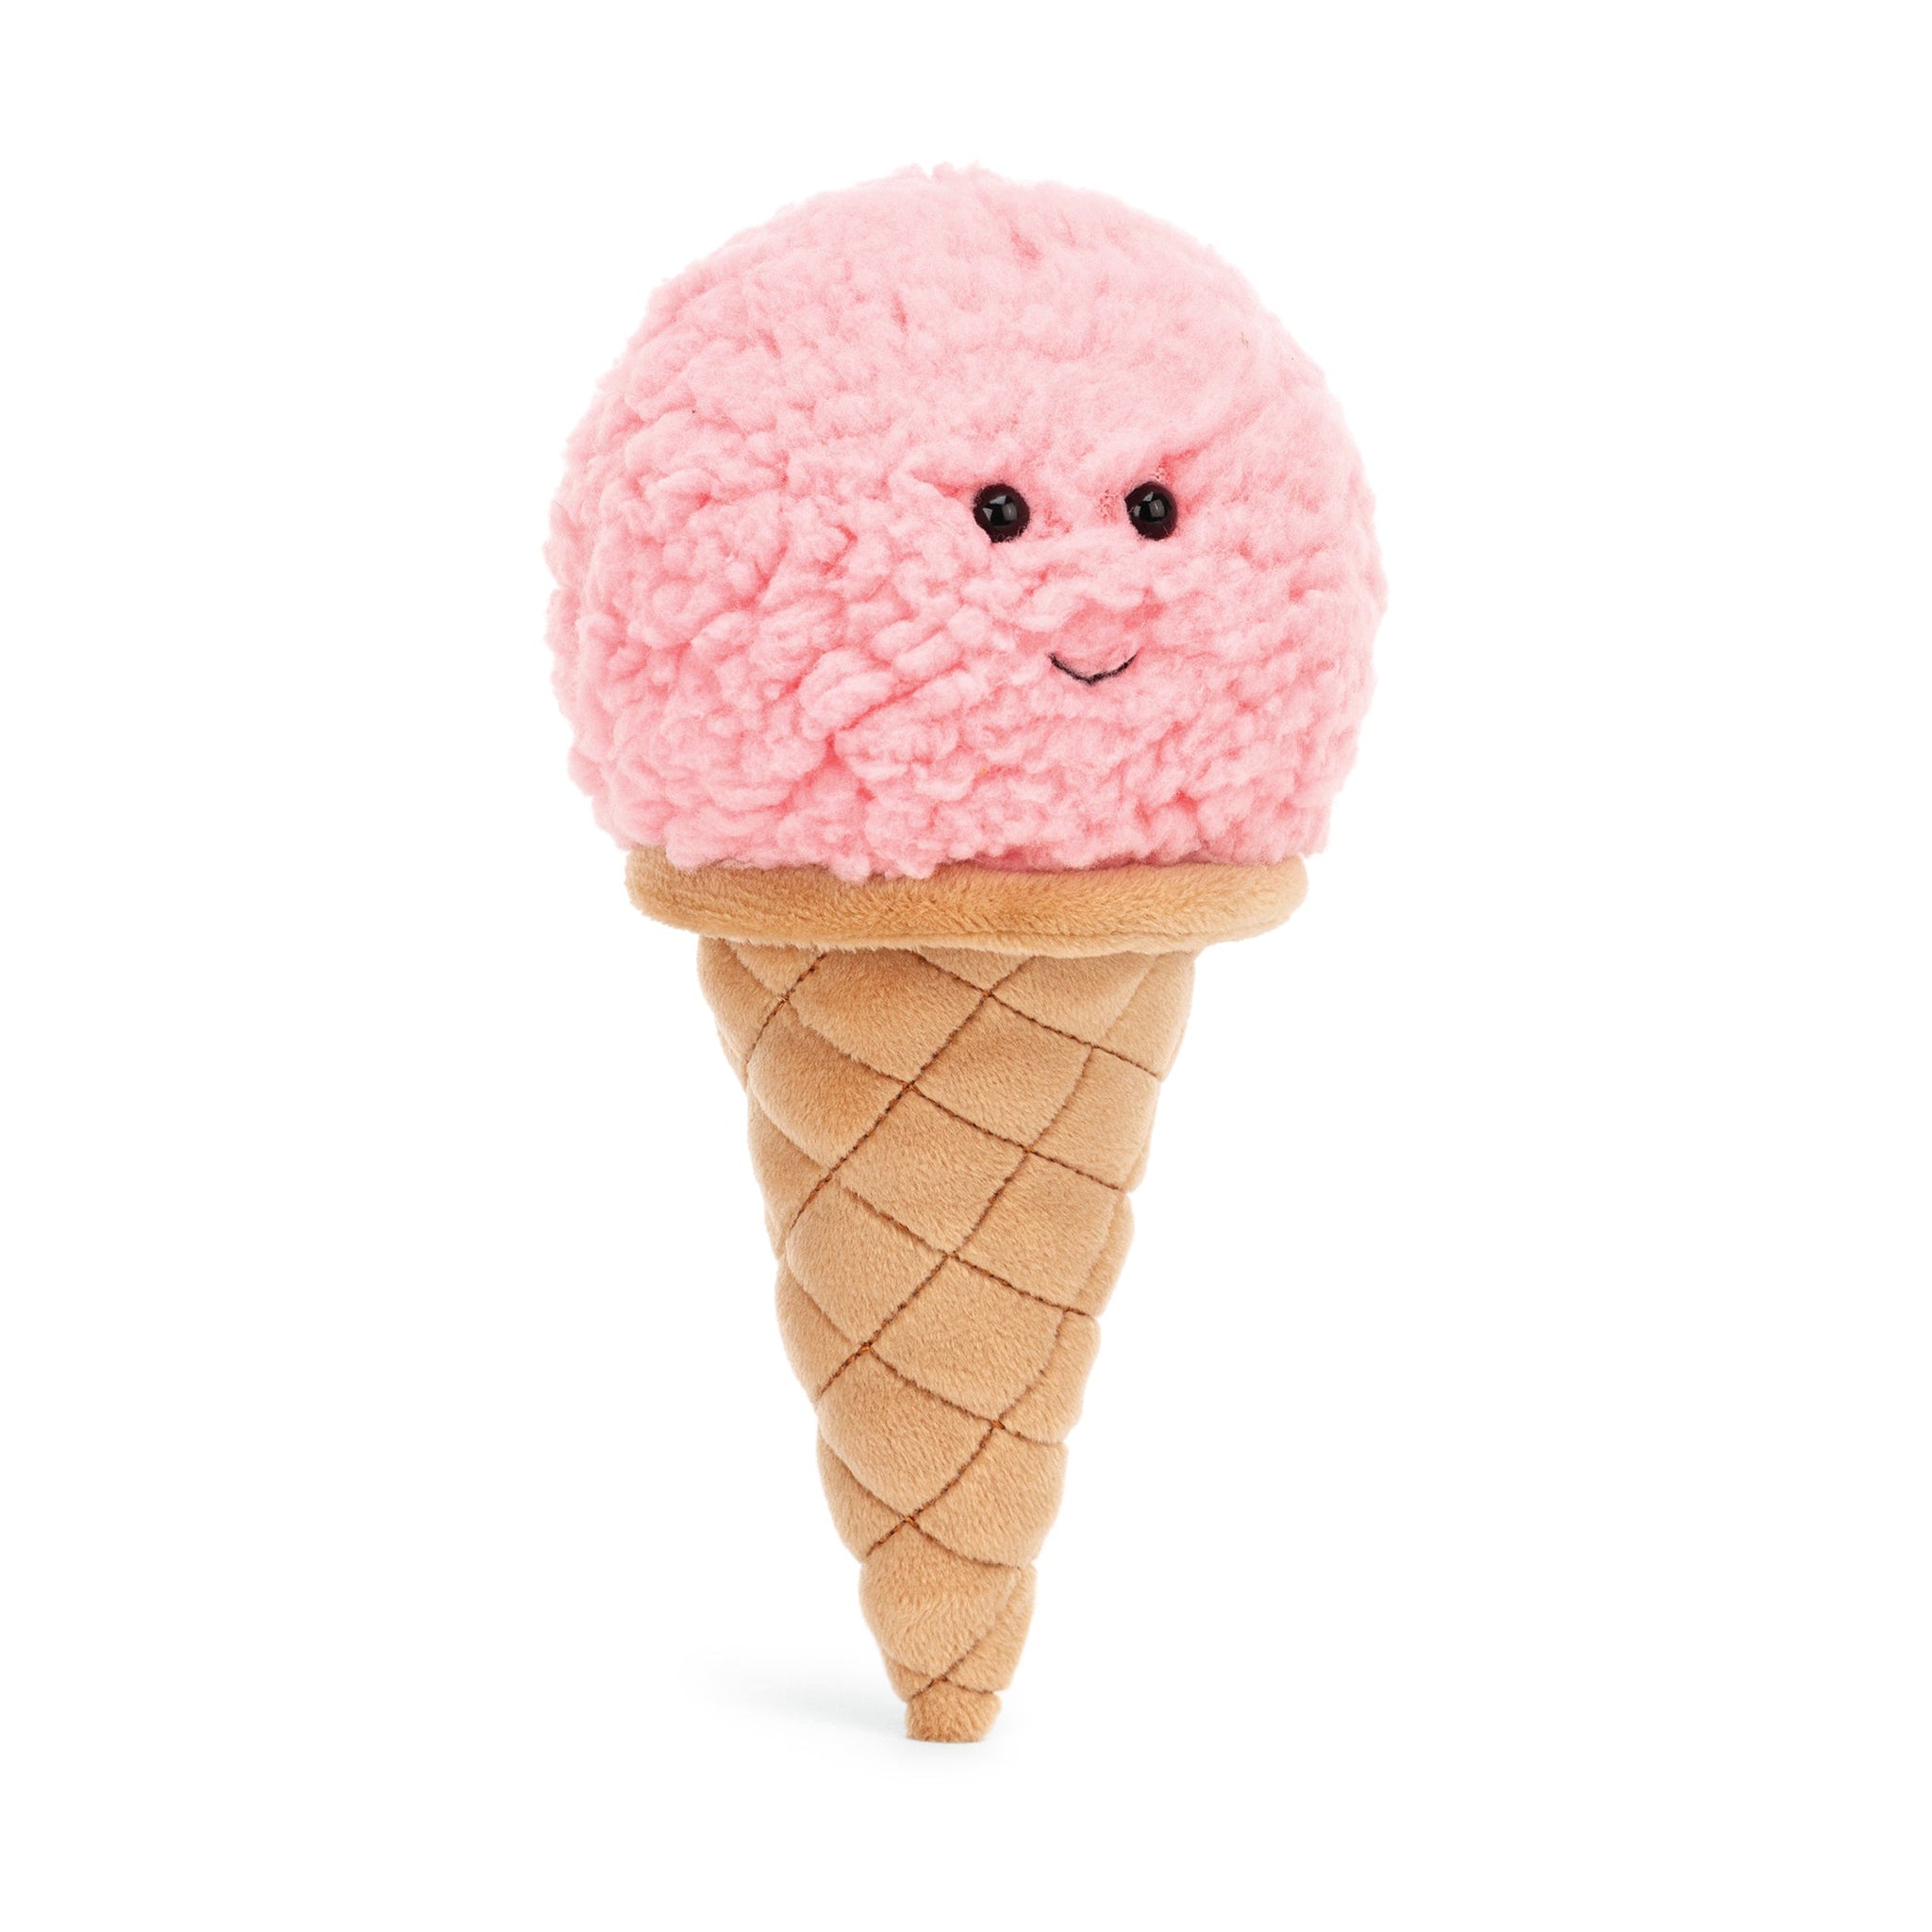 Irresistible Ice Cream - Assorted Colors